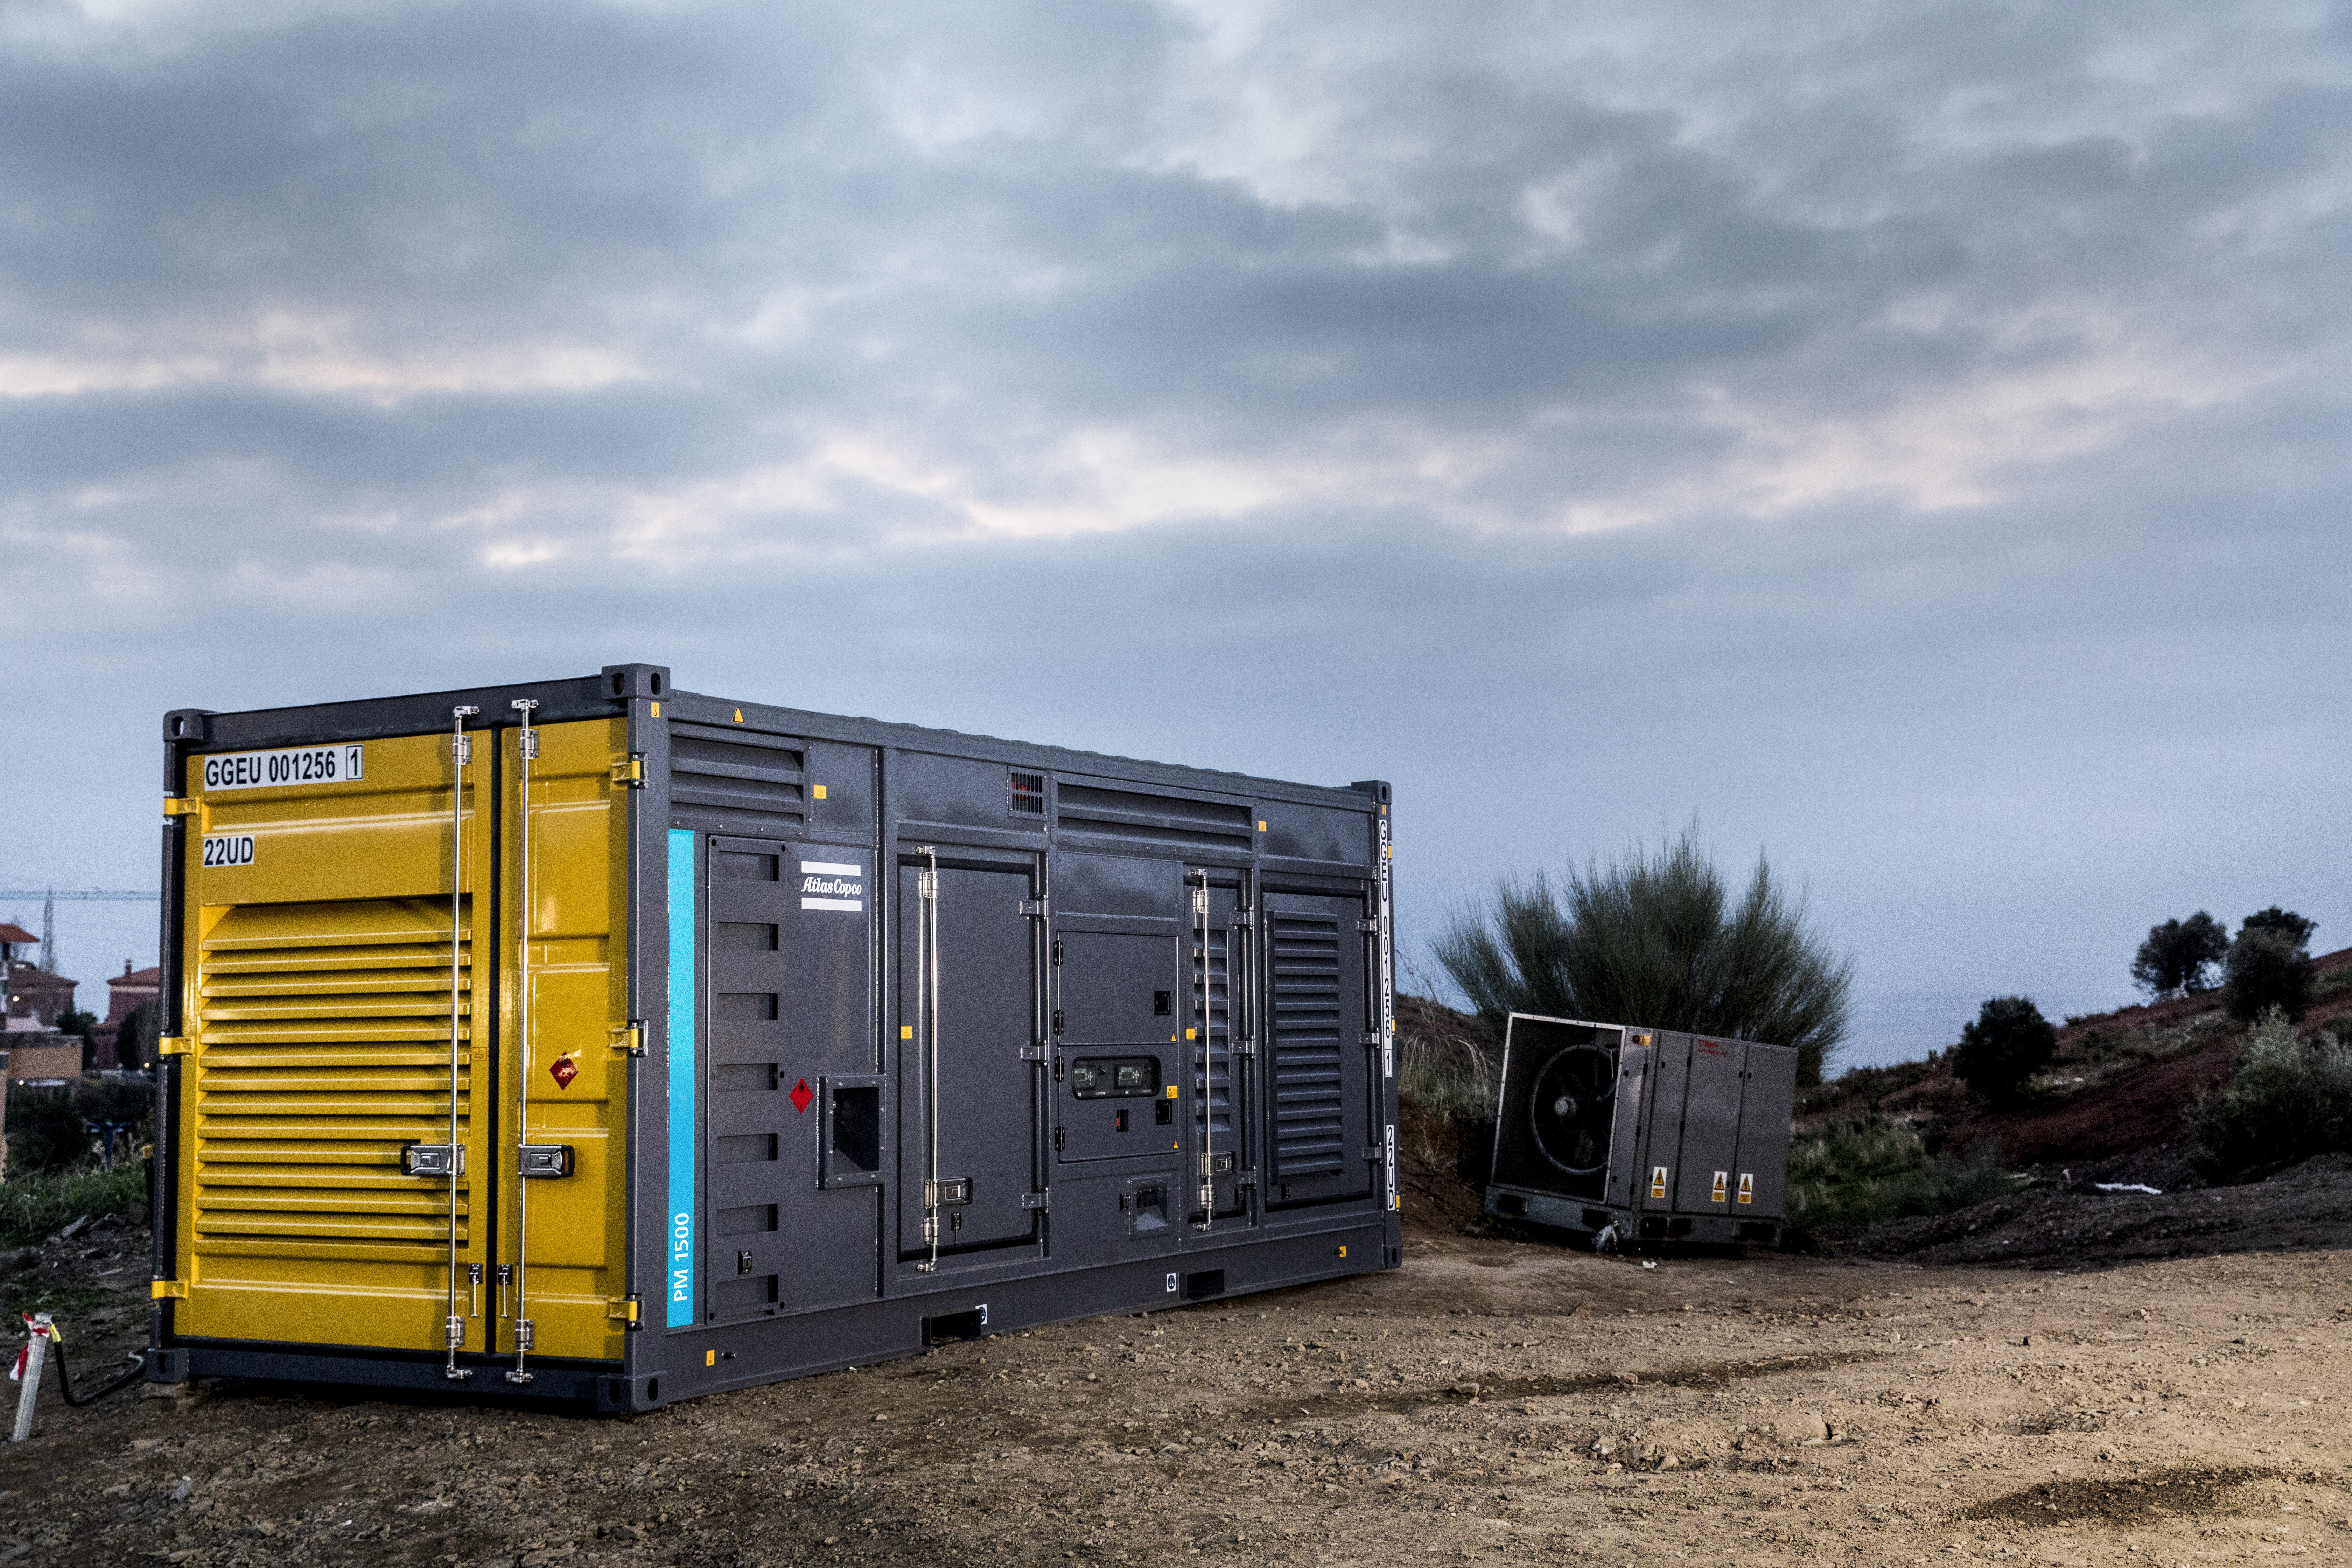 Power management features boost transformer maintenance flexibility for Atlas Copco Specialty Rental